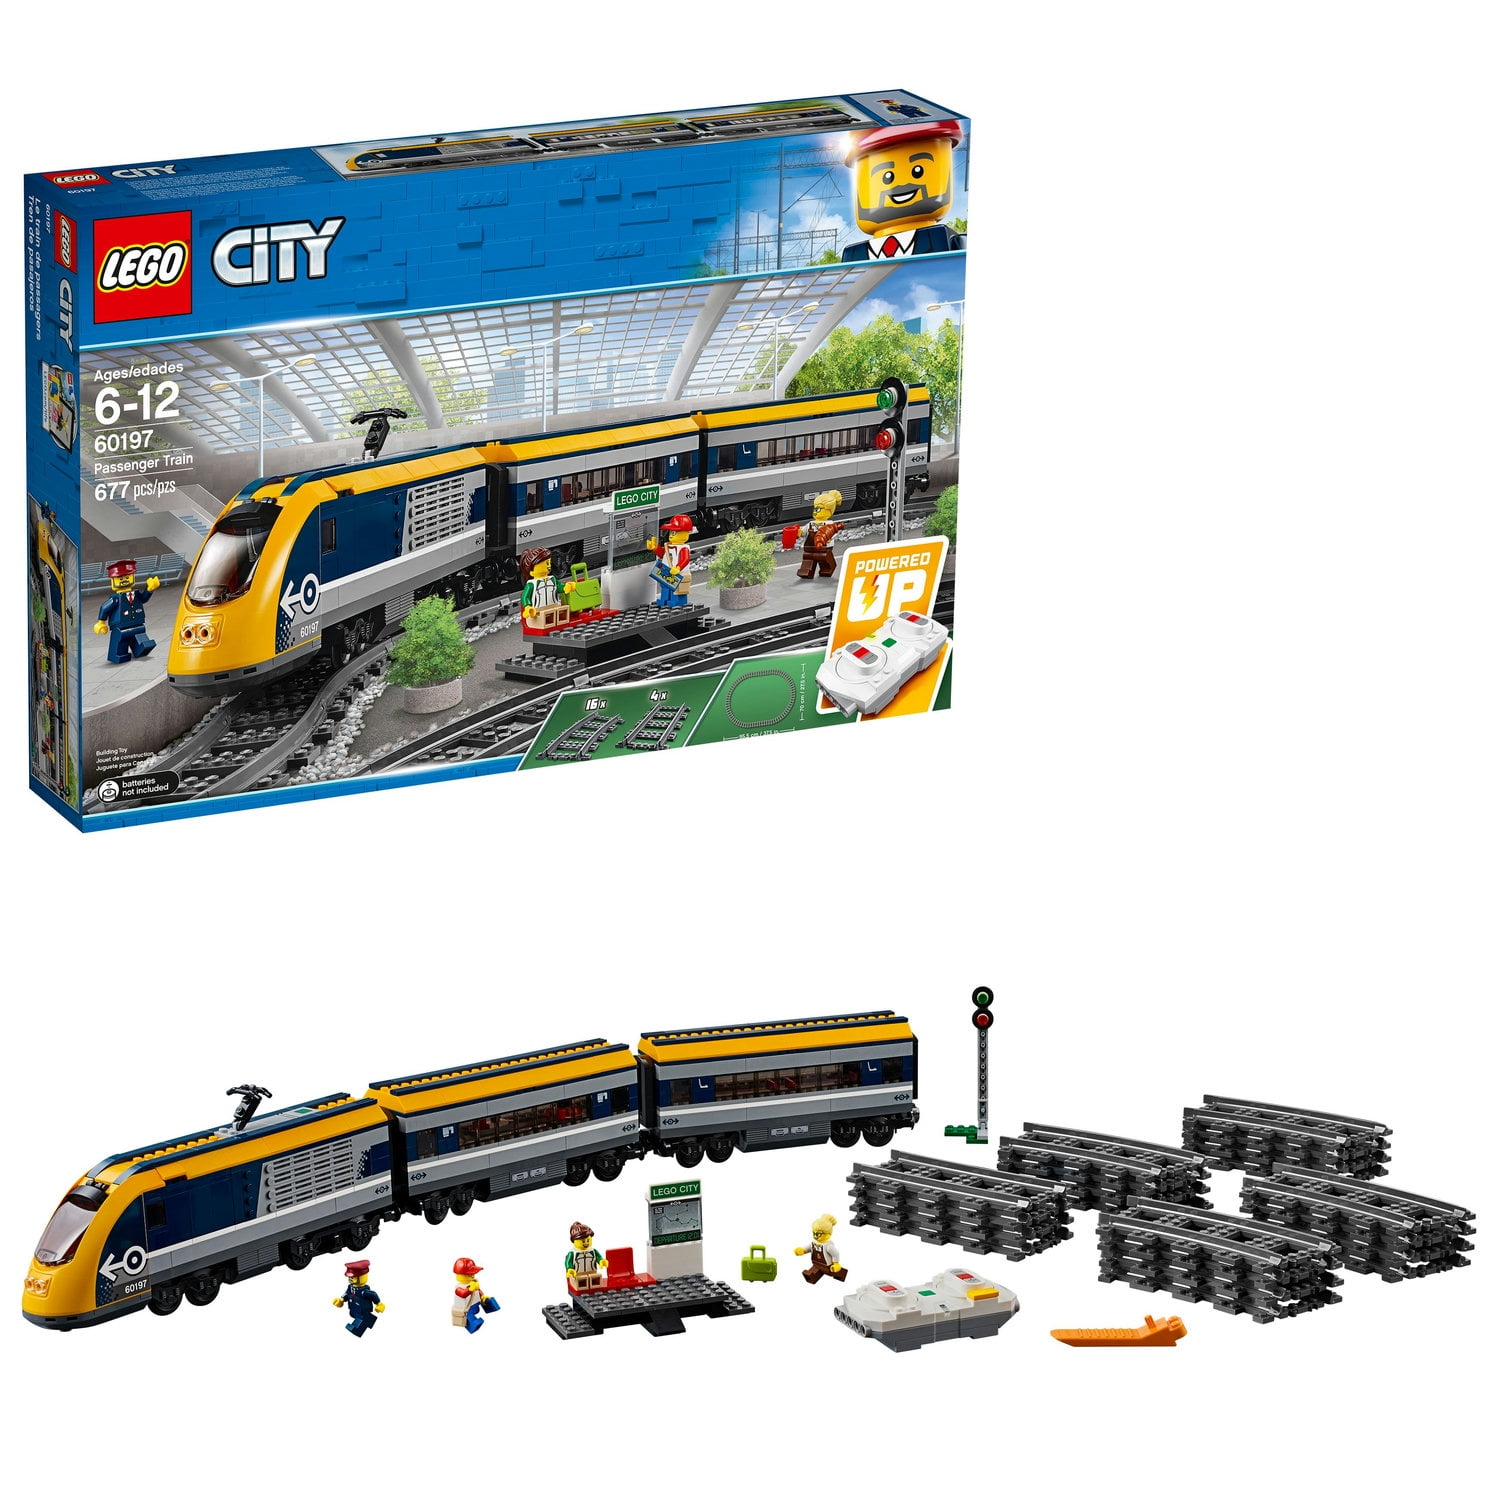 LEGO City Trains, train, imagination, Next Stop… Wherever you want. Check  out the all-new LEGO City Express Passenger Train and take your imagination  on an epic 🚅 ride!